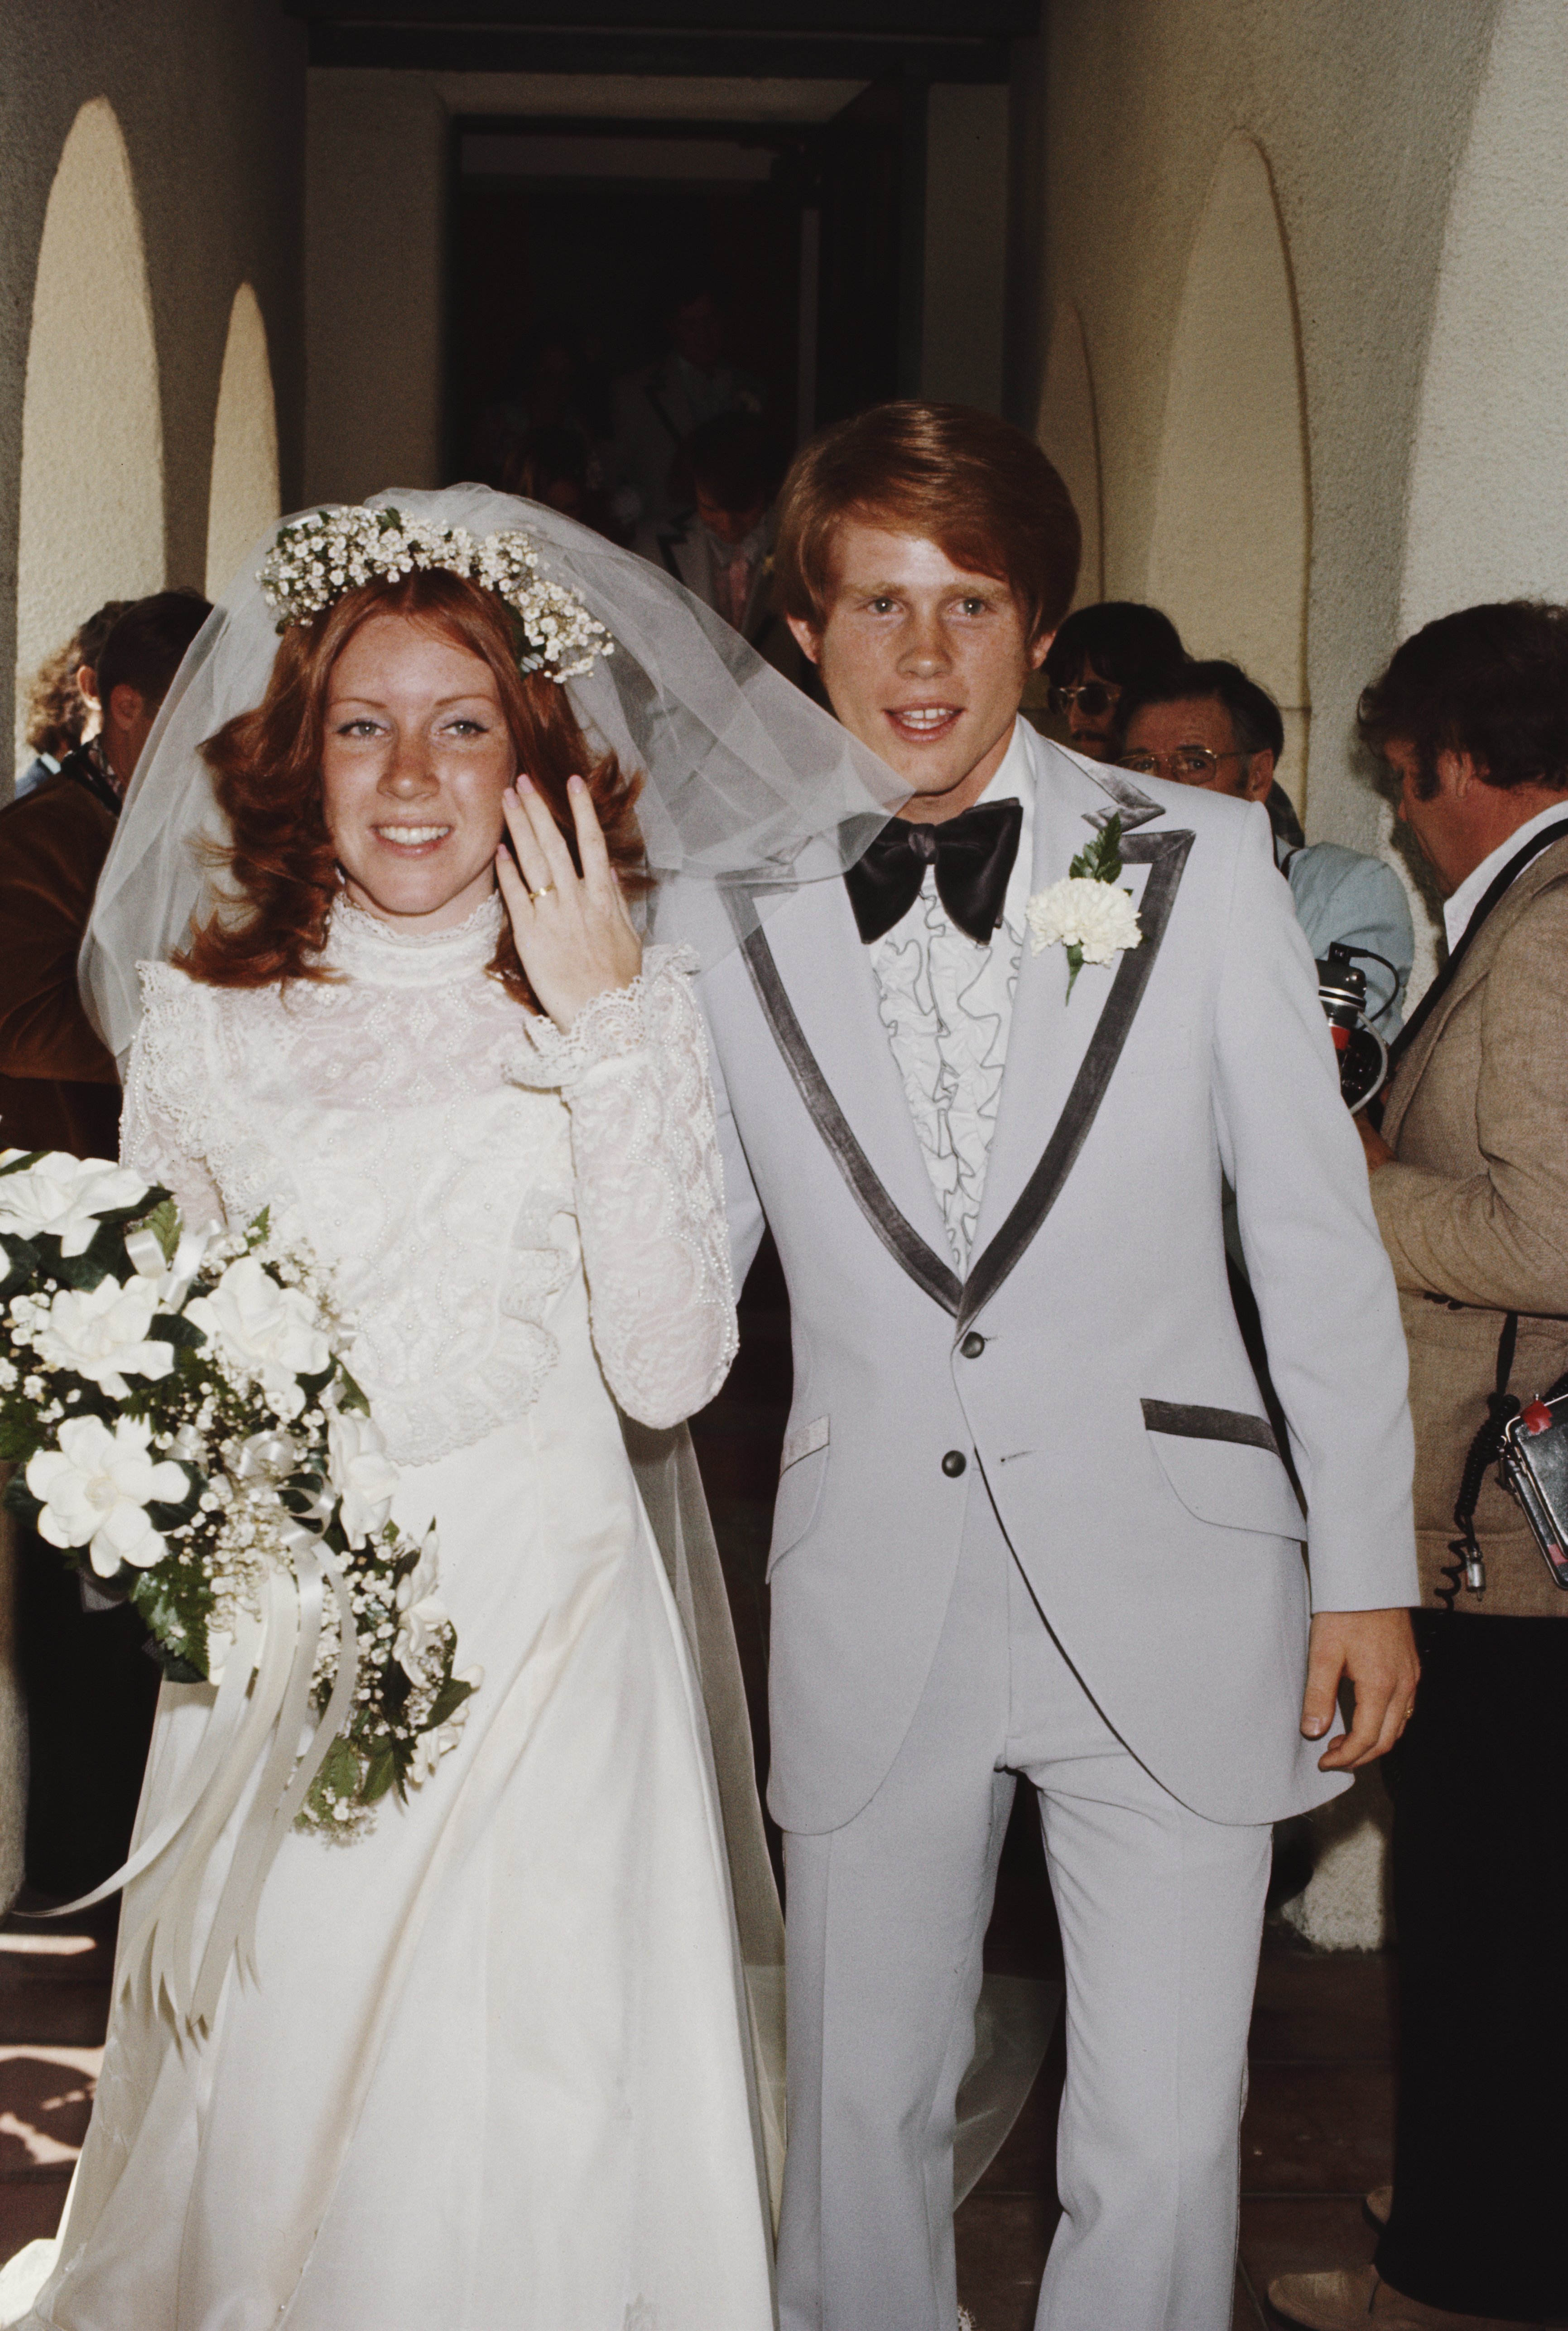 American actor Ron Howard marries Cheryl Alley at the Magnolia Park United Methodist Church in Burbank, California on June 7, 1975. | Source: Getty Images 